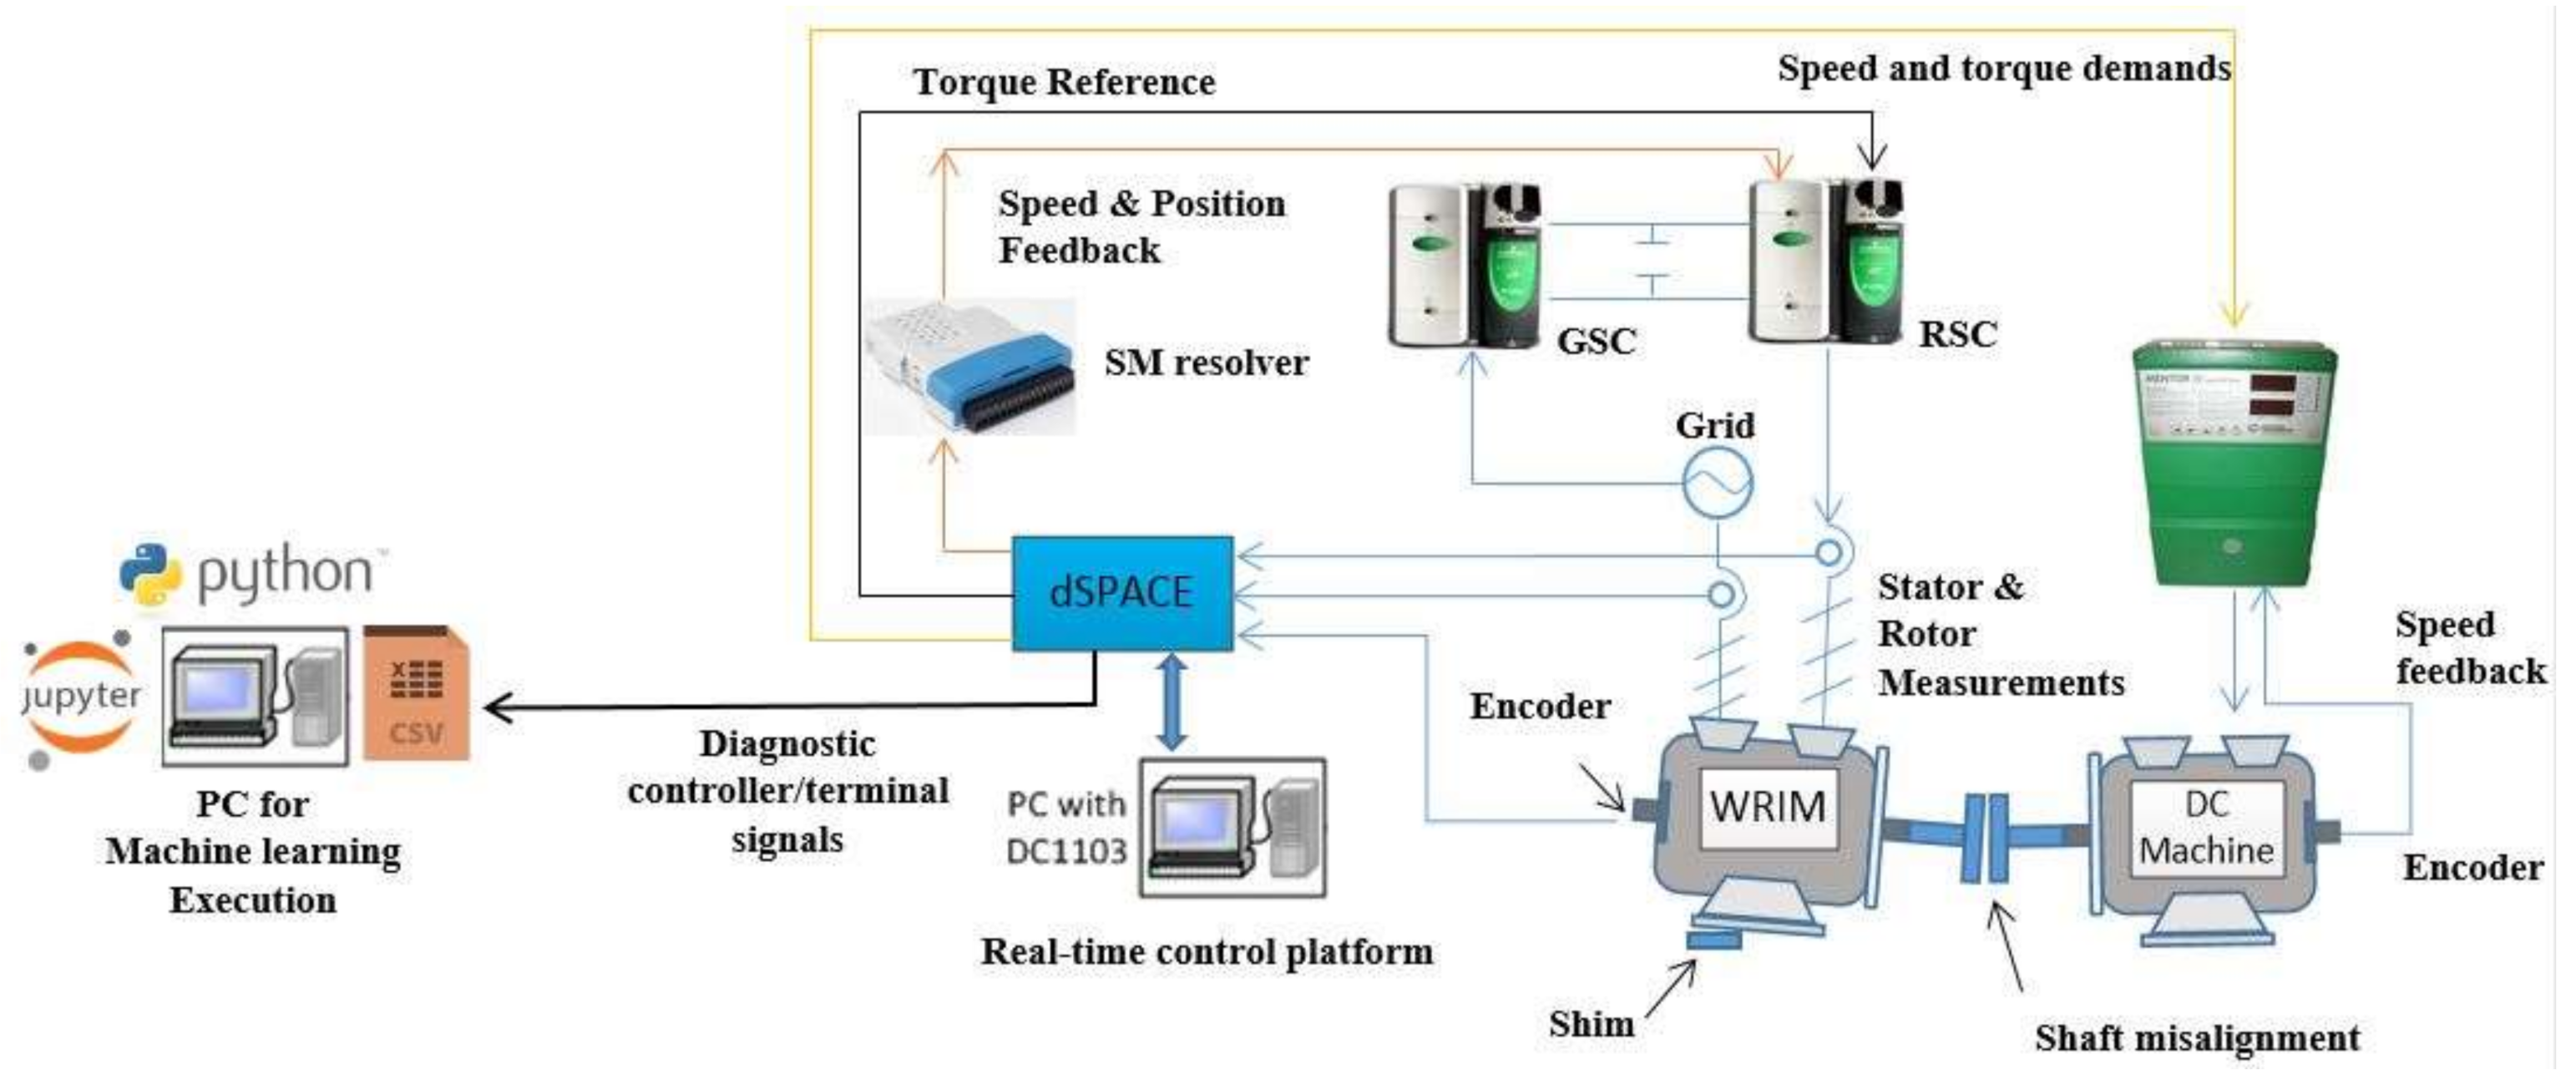 Energies | Free Full-Text | Wind Turbine Generator Controller Signals  Supervised Machine Learning for Shaft Misalignment Fault Detection: A  Doubly Fed Induction Generator Practical Case Study